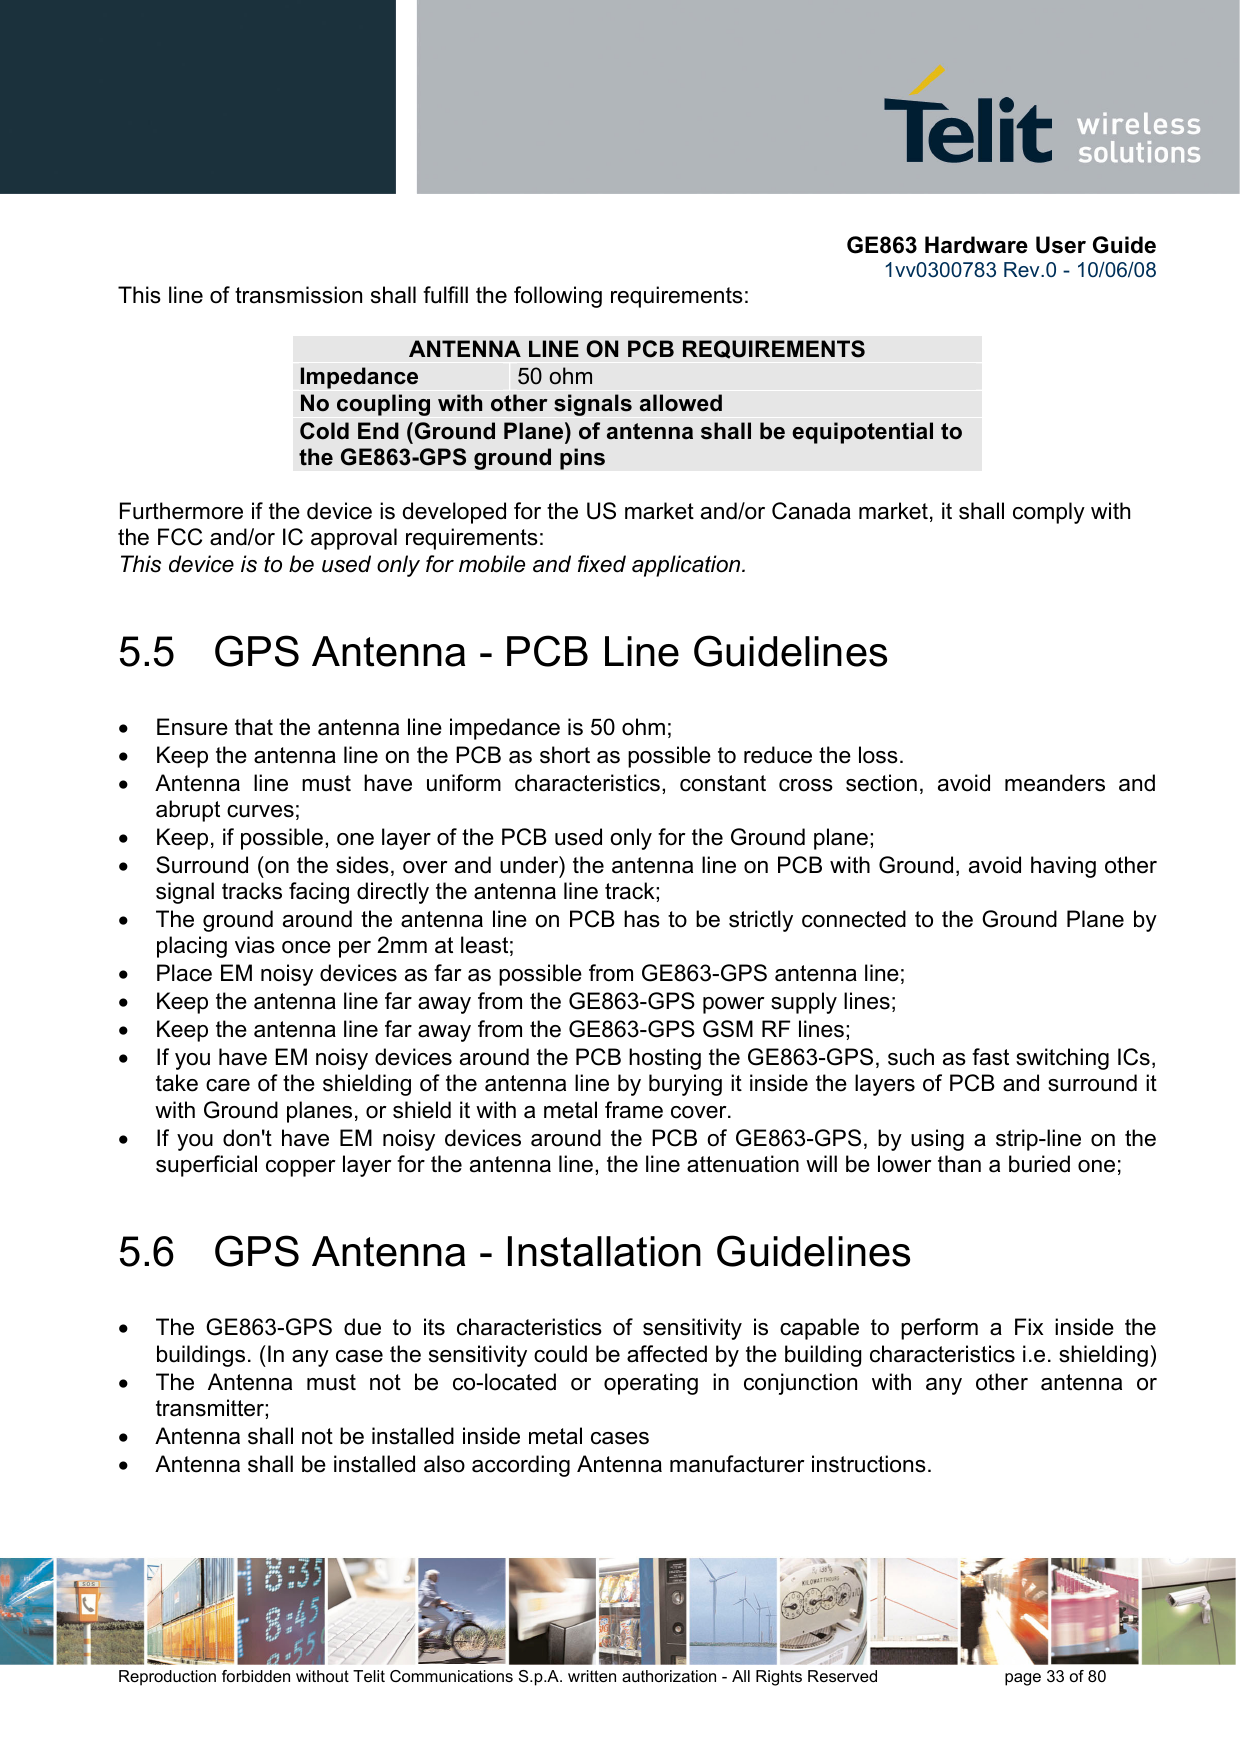       GE863 Hardware User Guide 1vv0300783 Rev.0 - 10/06/08 Reproduction forbidden without Telit Communications S.p.A. written authorization - All Rights Reserved    page 33 of 80  This line of transmission shall fulfill the following requirements:  ANTENNA LINE ON PCB REQUIREMENTS Impedance  50 ohm No coupling with other signals allowed Cold End (Ground Plane) of antenna shall be equipotential to the GE863-GPS ground pins  Furthermore if the device is developed for the US market and/or Canada market, it shall comply with the FCC and/or IC approval requirements: This device is to be used only for mobile and fixed application.  5.5   GPS Antenna - PCB Line Guidelines •  Ensure that the antenna line impedance is 50 ohm; •  Keep the antenna line on the PCB as short as possible to reduce the loss. •  Antenna line must have uniform characteristics, constant cross section, avoid meanders and abrupt curves; •  Keep, if possible, one layer of the PCB used only for the Ground plane; •  Surround (on the sides, over and under) the antenna line on PCB with Ground, avoid having other signal tracks facing directly the antenna line track; •  The ground around the antenna line on PCB has to be strictly connected to the Ground Plane by placing vias once per 2mm at least; •  Place EM noisy devices as far as possible from GE863-GPS antenna line; •  Keep the antenna line far away from the GE863-GPS power supply lines; •  Keep the antenna line far away from the GE863-GPS GSM RF lines; •  If you have EM noisy devices around the PCB hosting the GE863-GPS, such as fast switching ICs, take care of the shielding of the antenna line by burying it inside the layers of PCB and surround it with Ground planes, or shield it with a metal frame cover. •  If you don&apos;t have EM noisy devices around the PCB of GE863-GPS, by using a strip-line on the superficial copper layer for the antenna line, the line attenuation will be lower than a buried one; 5.6   GPS Antenna - Installation Guidelines •  The GE863-GPS due to its characteristics of sensitivity is capable to perform a Fix inside the buildings. (In any case the sensitivity could be affected by the building characteristics i.e. shielding) •  The Antenna must not be co-located or operating in conjunction with any other antenna or transmitter; •  Antenna shall not be installed inside metal cases  •  Antenna shall be installed also according Antenna manufacturer instructions.  